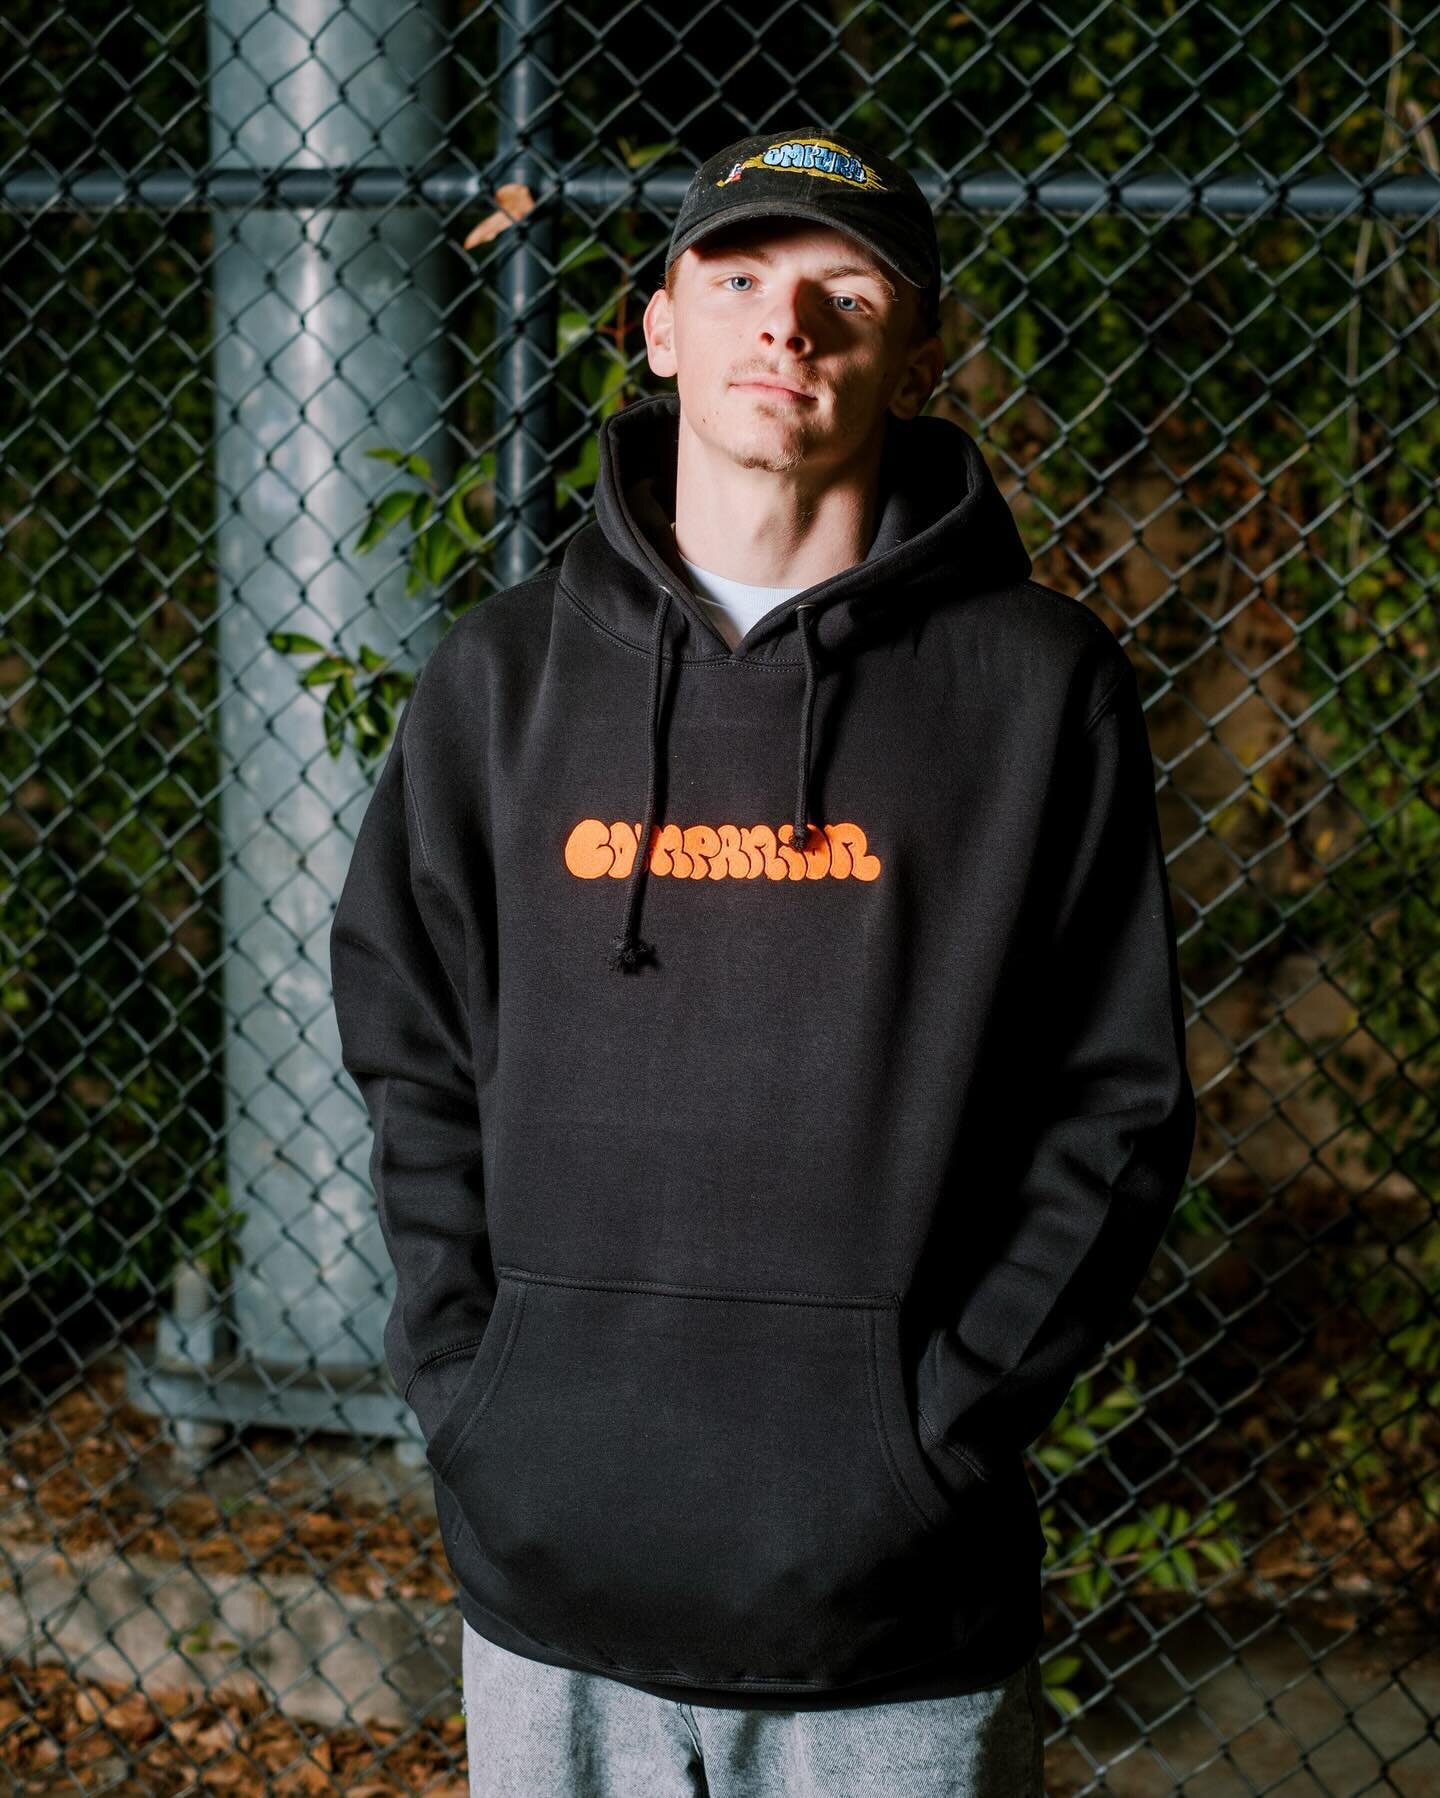 There&rsquo;s a few of these hoodies and beanies left at Companion! Talk about winning Christmas, put these under the tree and shoooo!
On a slightly more serious note, over the last year I&rsquo;ve been lucky to get to work with the folks at Companio